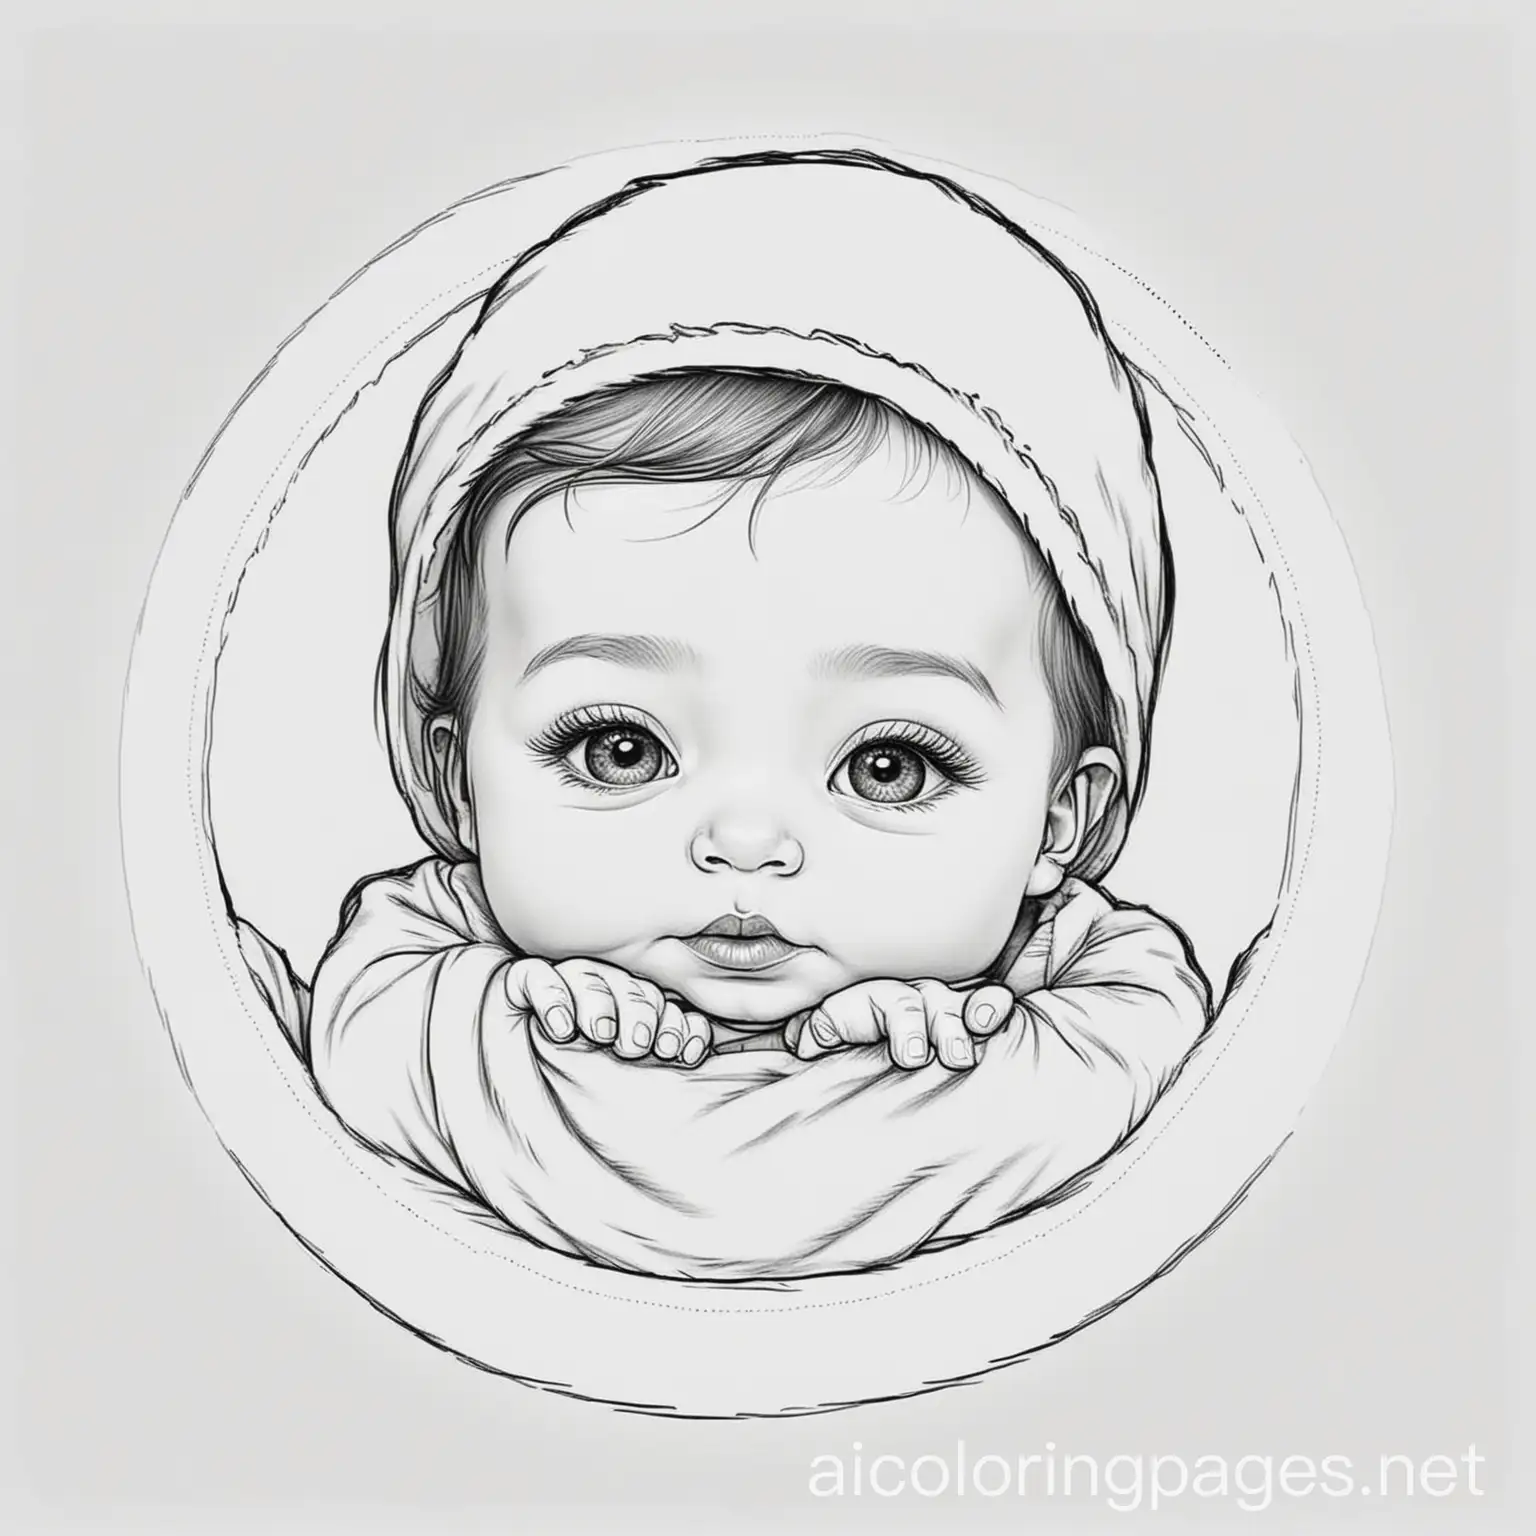 New born baby, Coloring Page, black and white, line art, white background, Simplicity, Ample White Space. The background of the coloring page is plain white to make it easy for young children to color within the lines. The outlines of all the subjects are easy to distinguish, making it simple for kids to color without too much difficulty